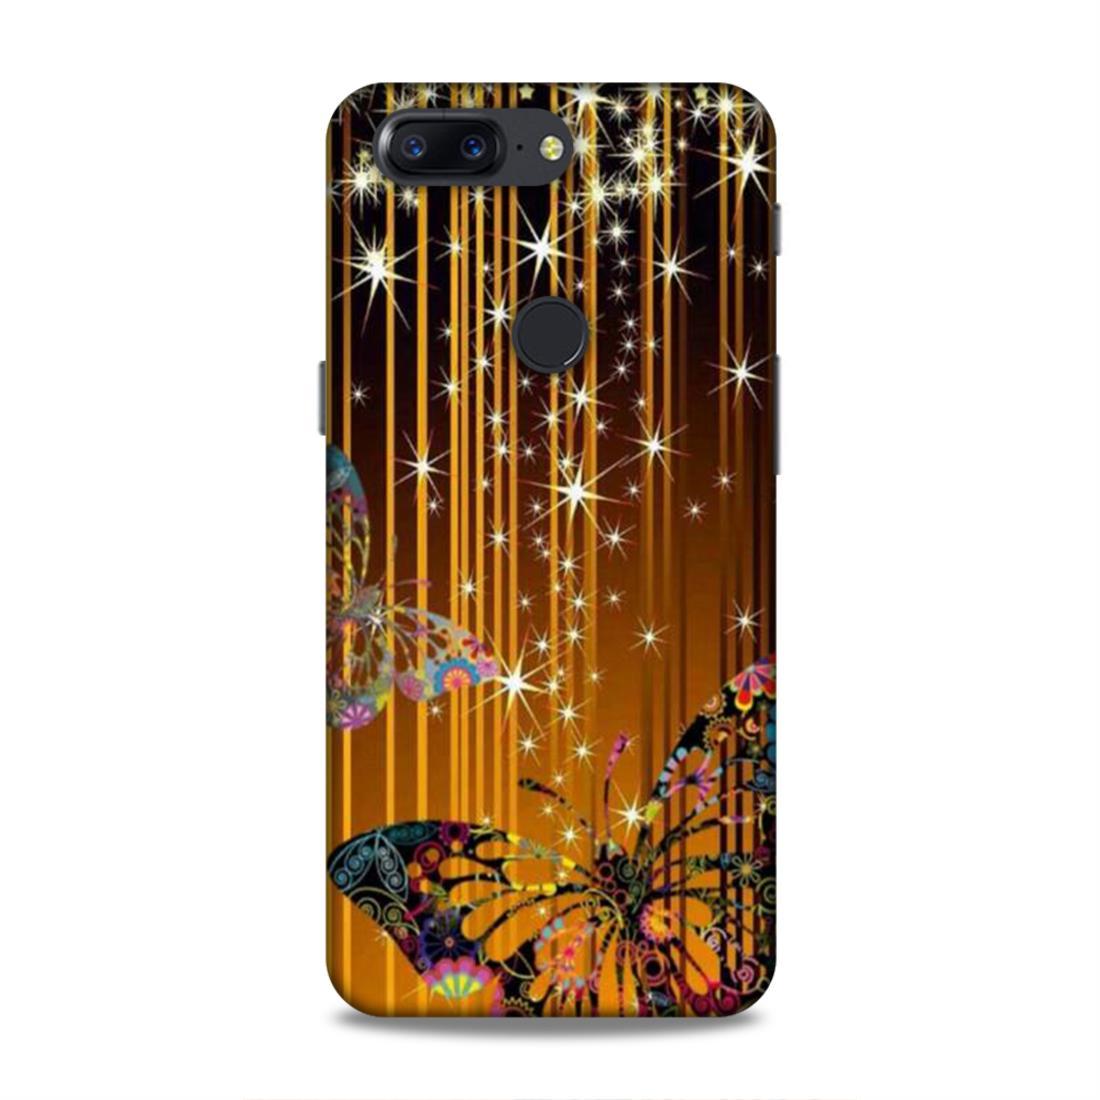 Fancy Star Butterfly OnePlus 5T Mobile Cover Case